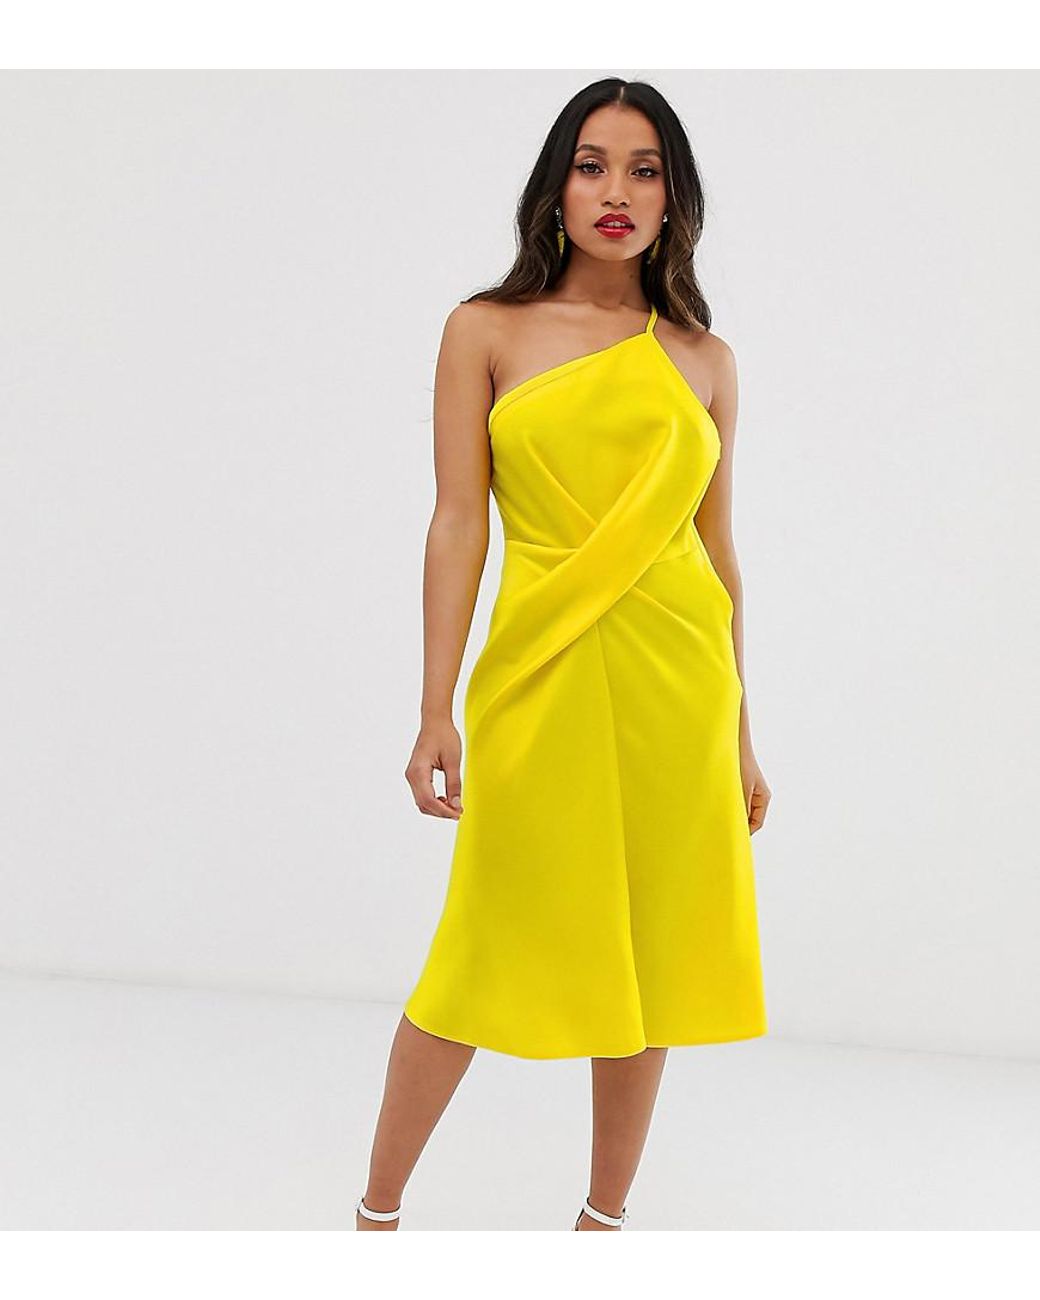 ASOS Asos Design Petite Midi Dress With One Shoulder In Satin in Red - Lyst